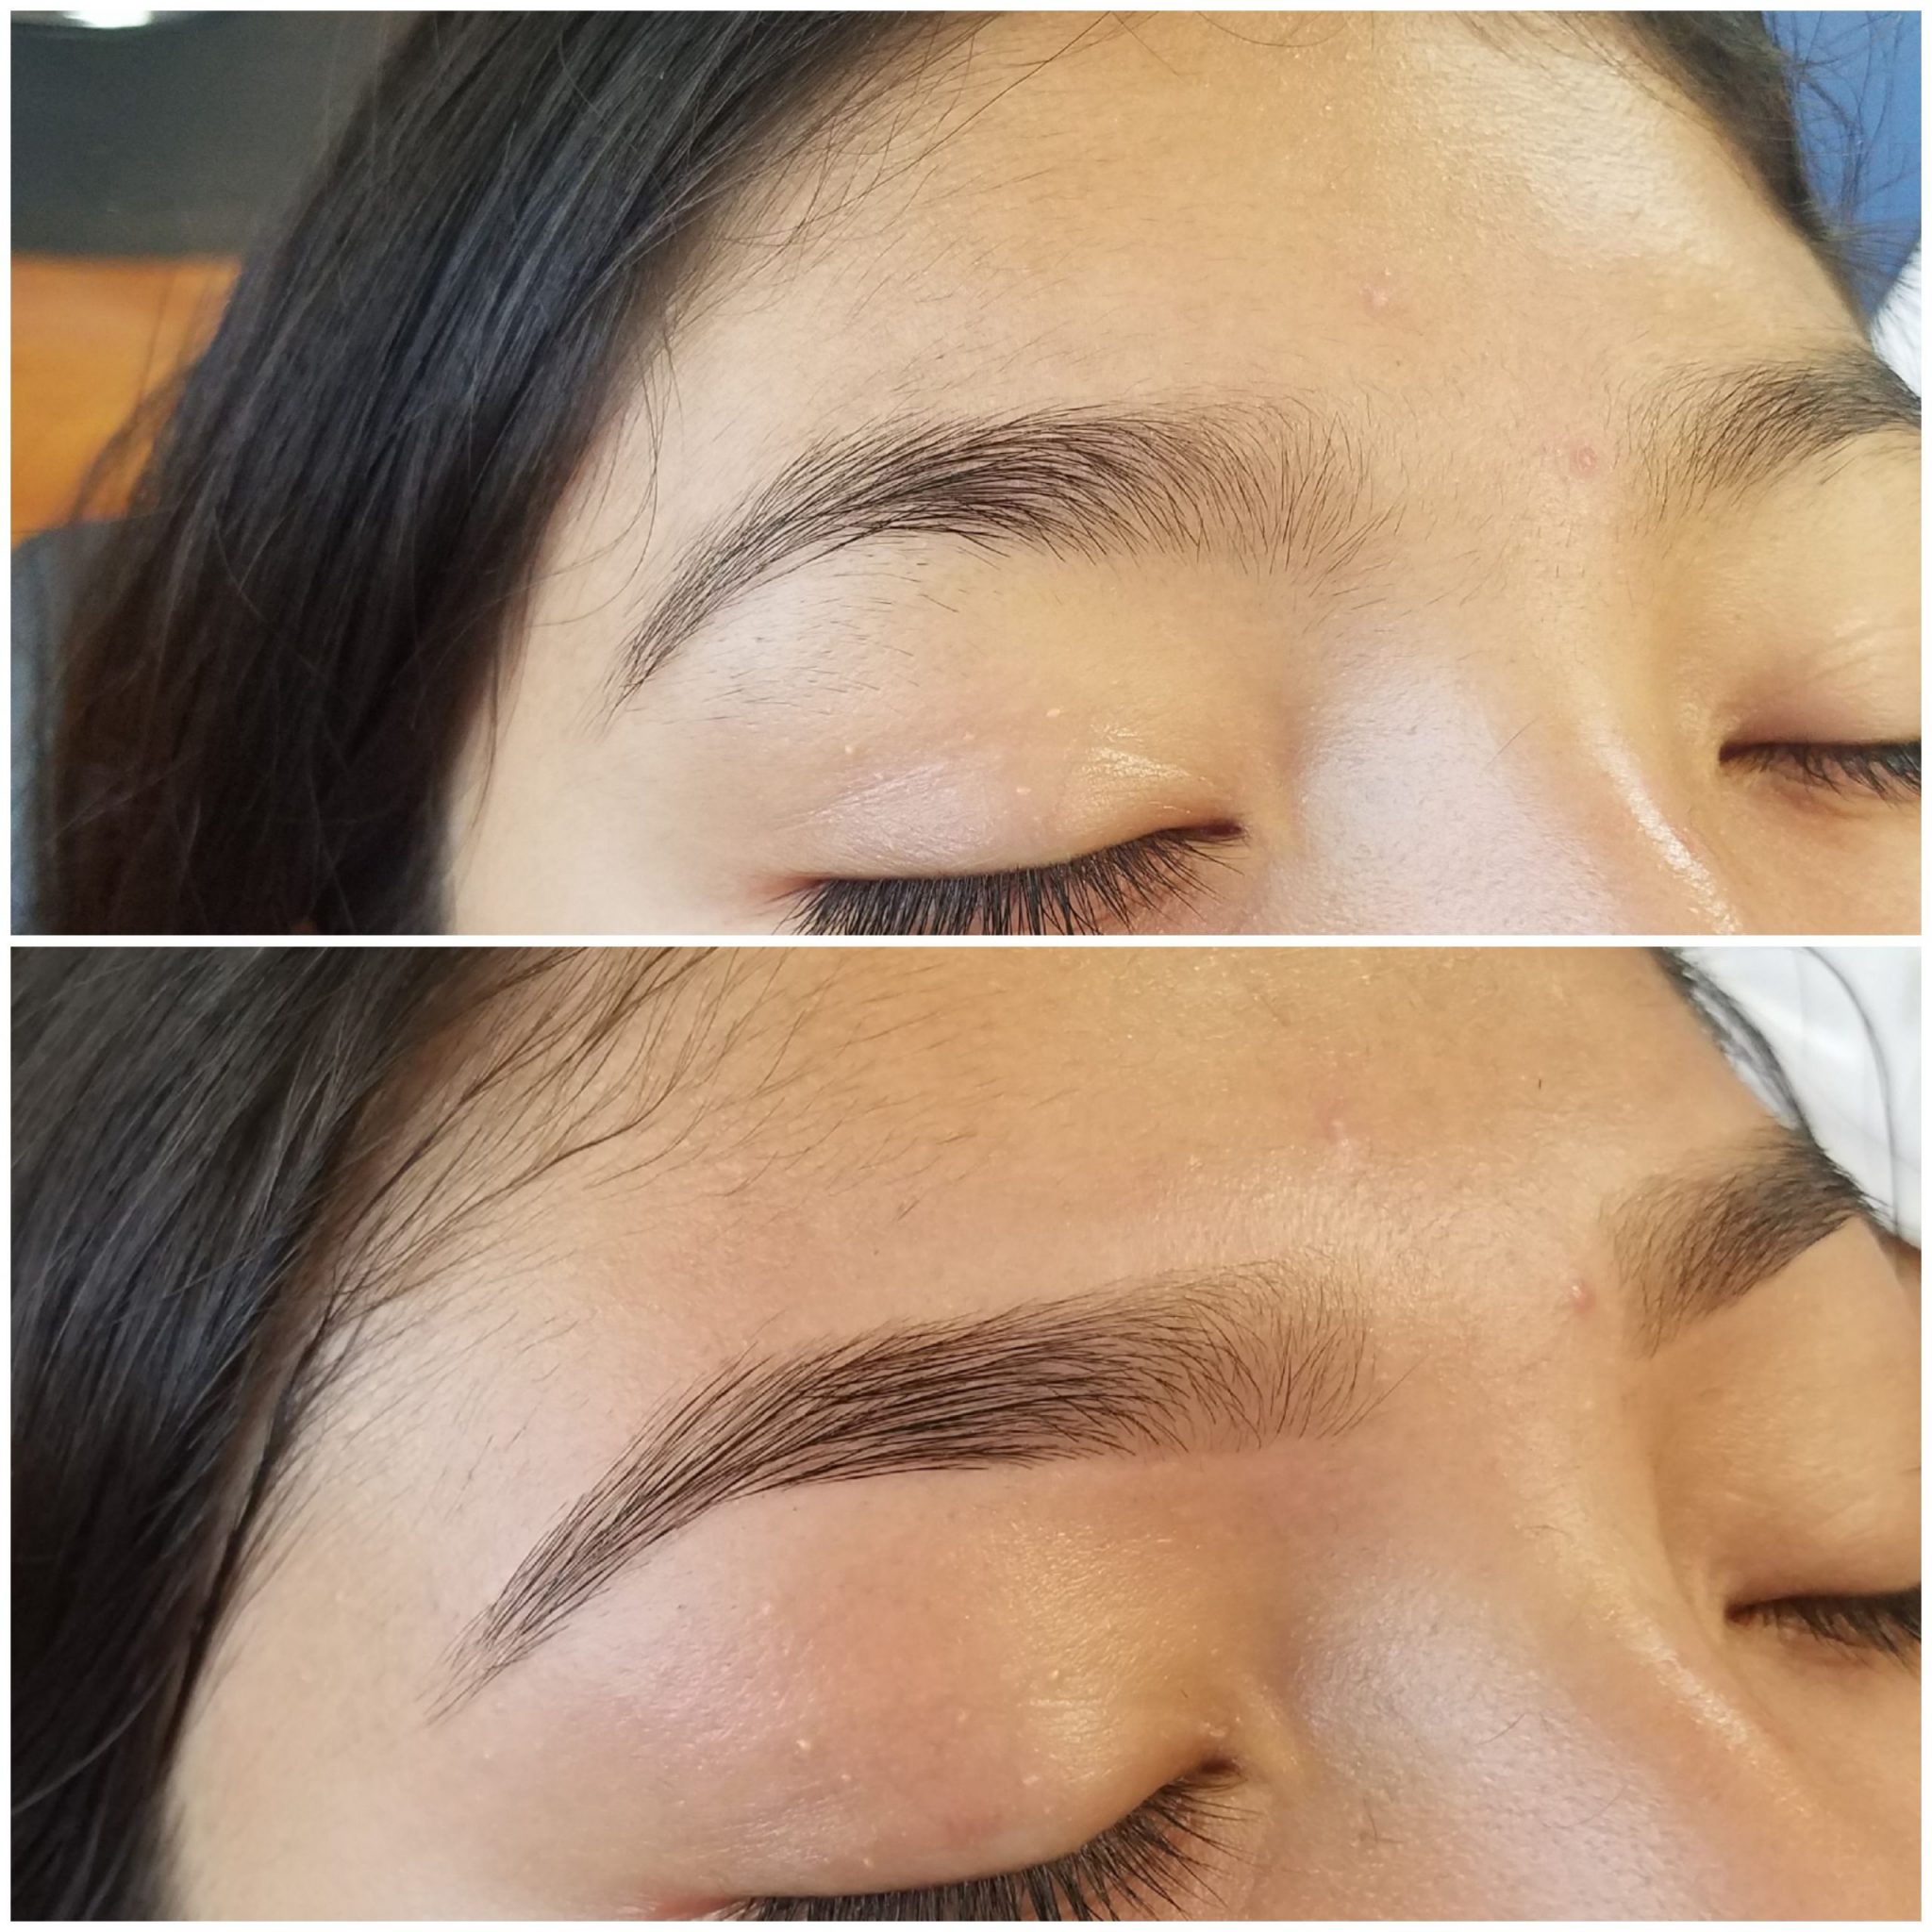 BH-Client-Brow-Pic-09.27.19-scaled